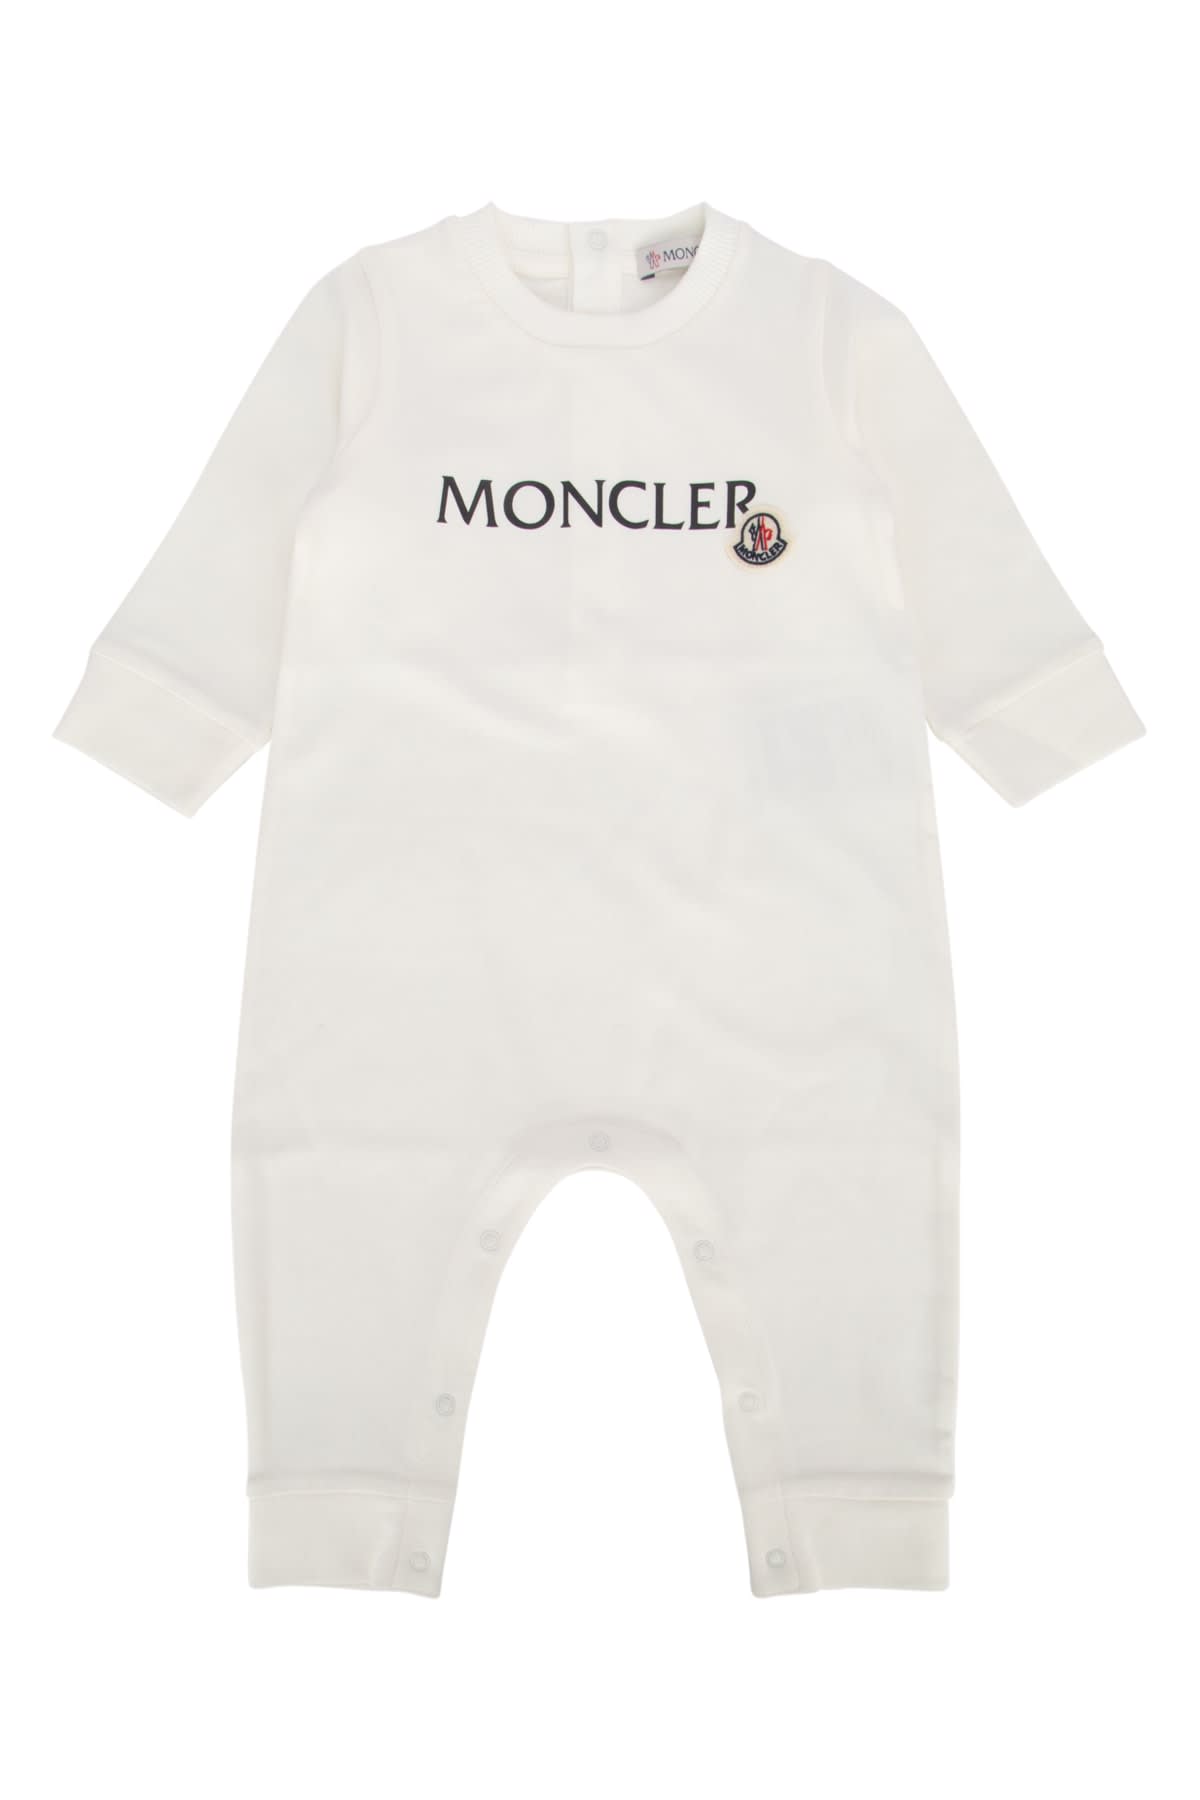 Moncler Babies' Maglione In White